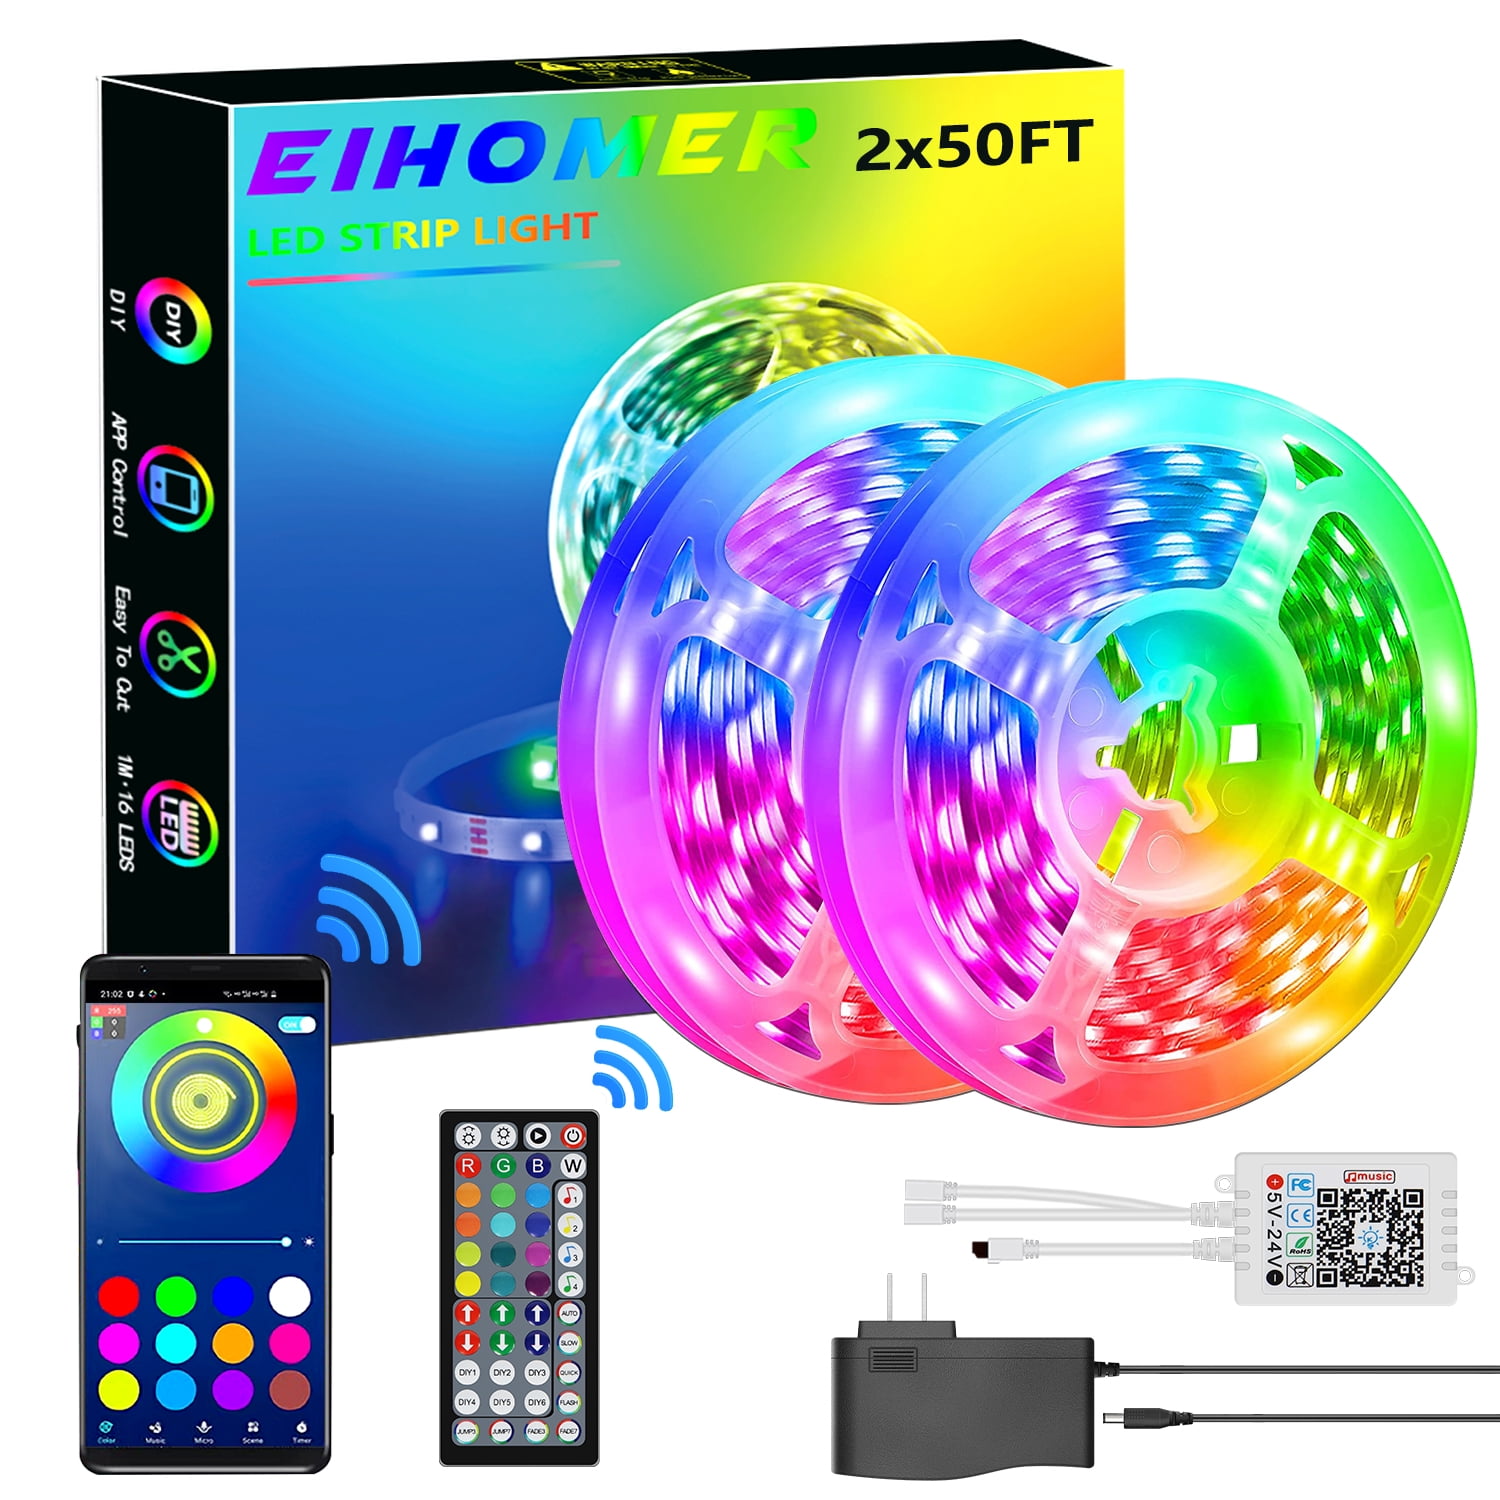 100FT/30M LED Strip 5050 RGB Multicolor Flexible LED Rope Lights with Remote and 24V Power Supply for Bedroom, Drawing Room, Kitchen (2 Roll X 50ft) - Walmart.com